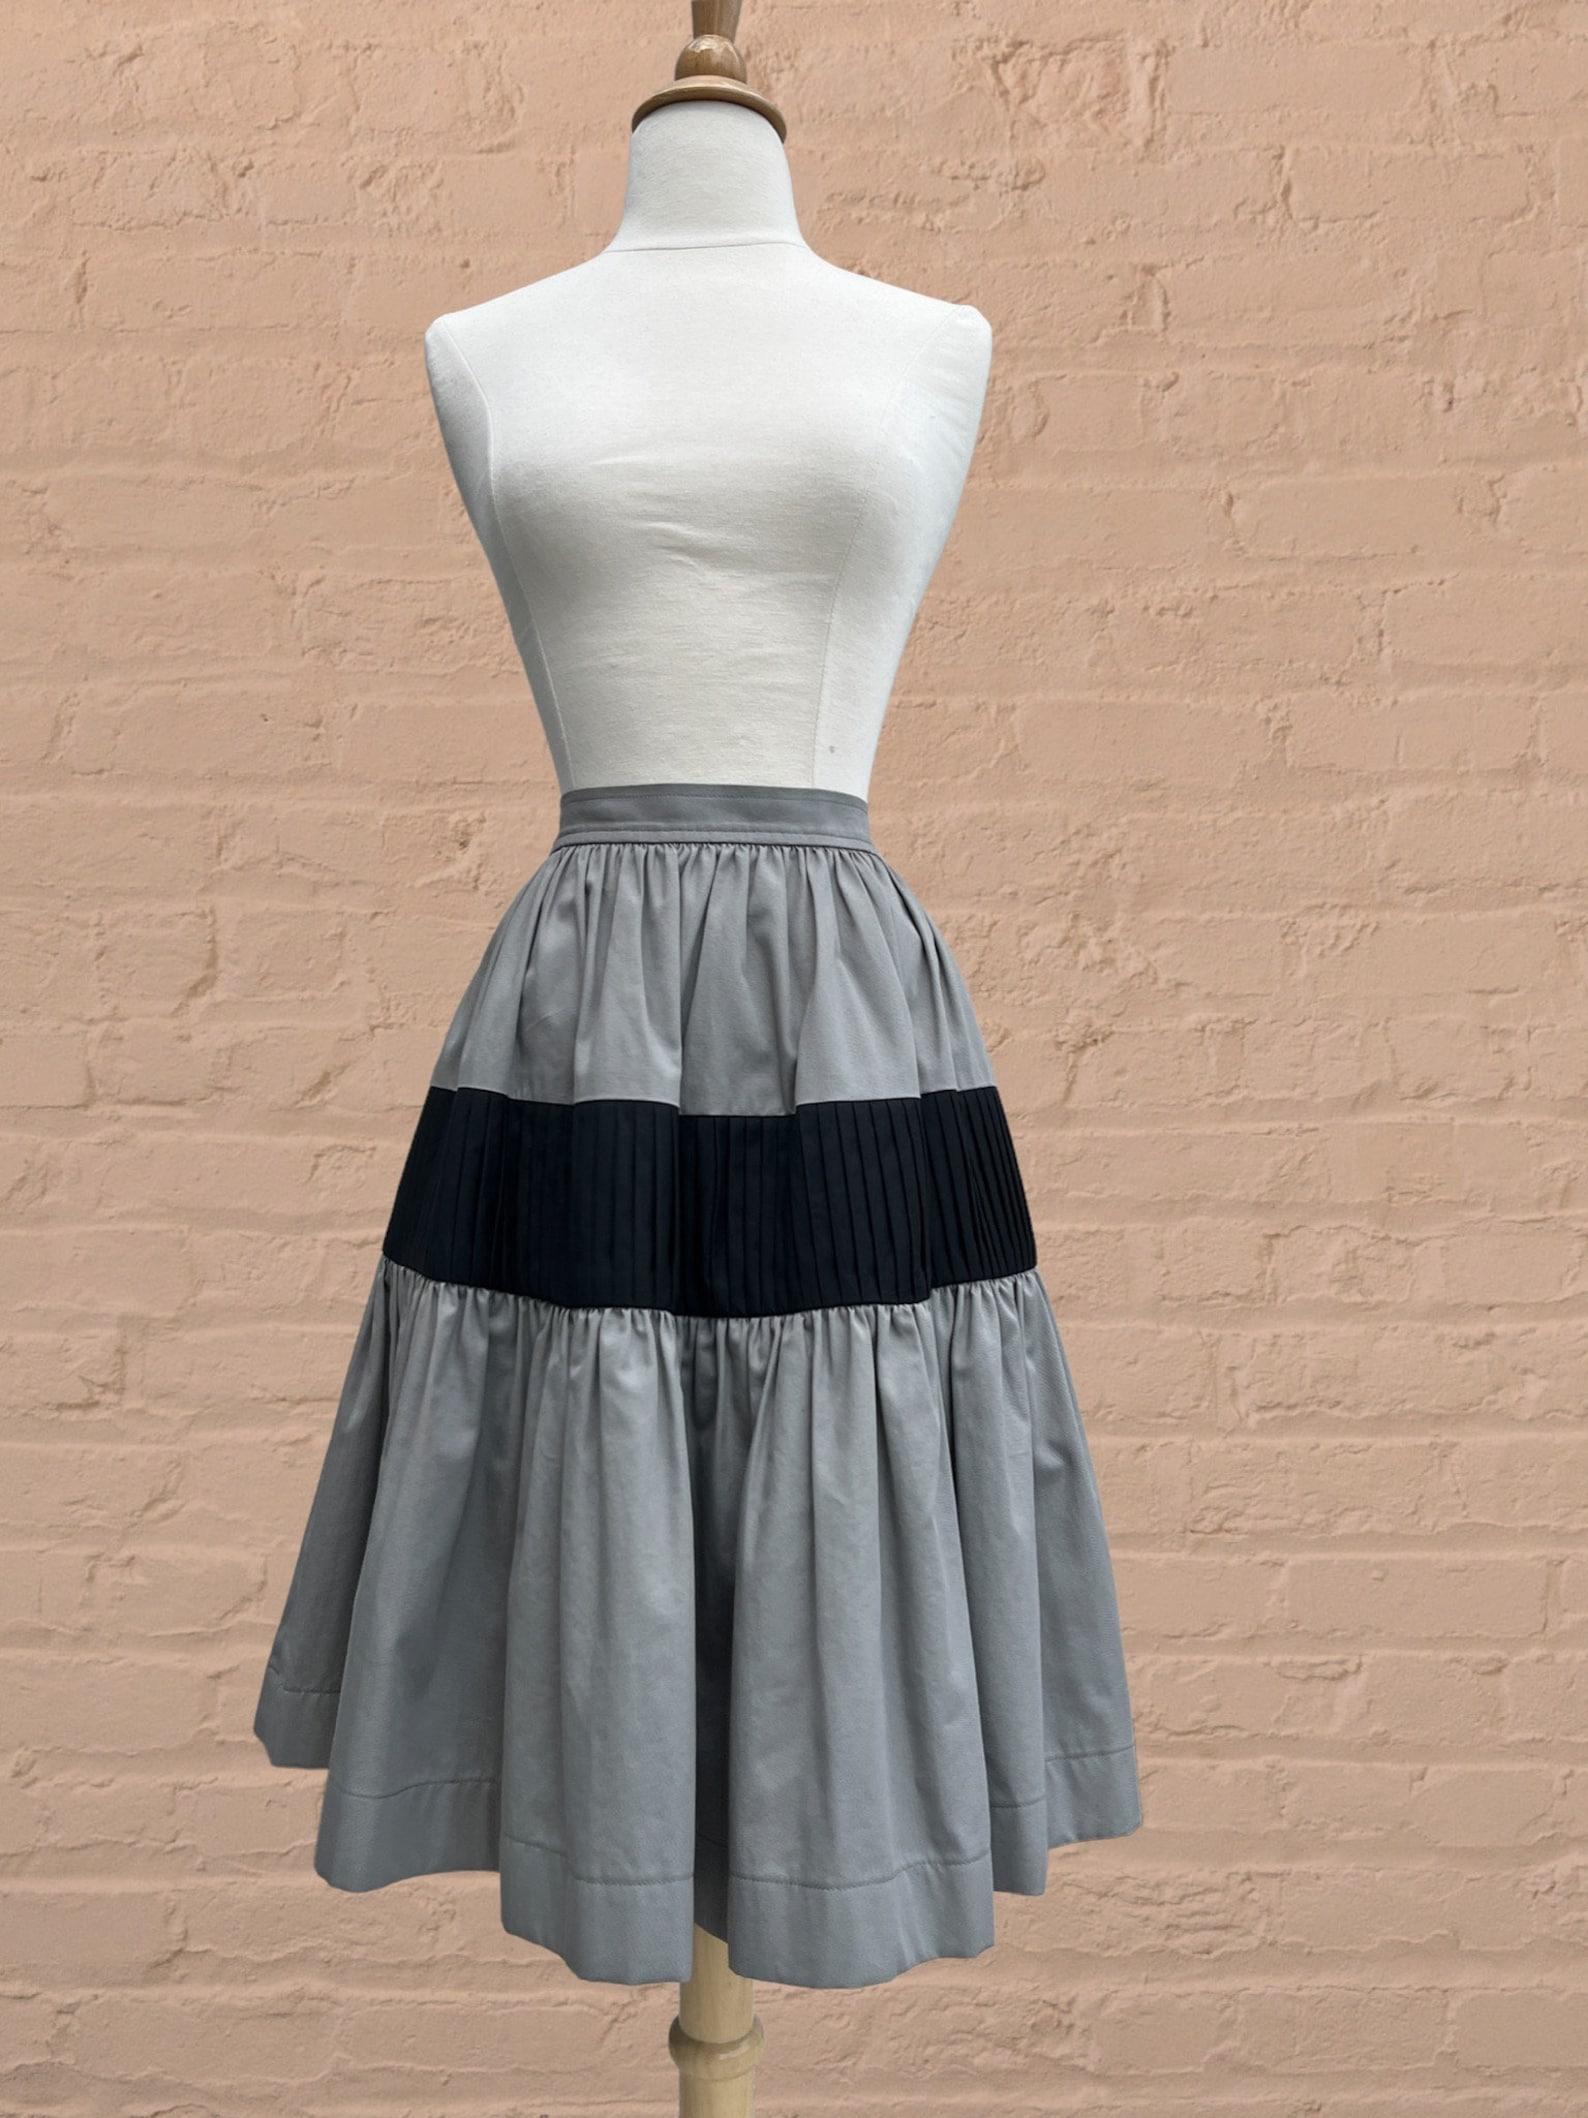 Yves Saint Laurent two tone color block cotton gabardine skirt. high waist. a line silhouette. ruffle & knife pleating. hidden hip pockets. side zip closure with hidden hook & eye.

✩ This classic skirt is an amazing find!

Circa 1970s/1980s
Yves